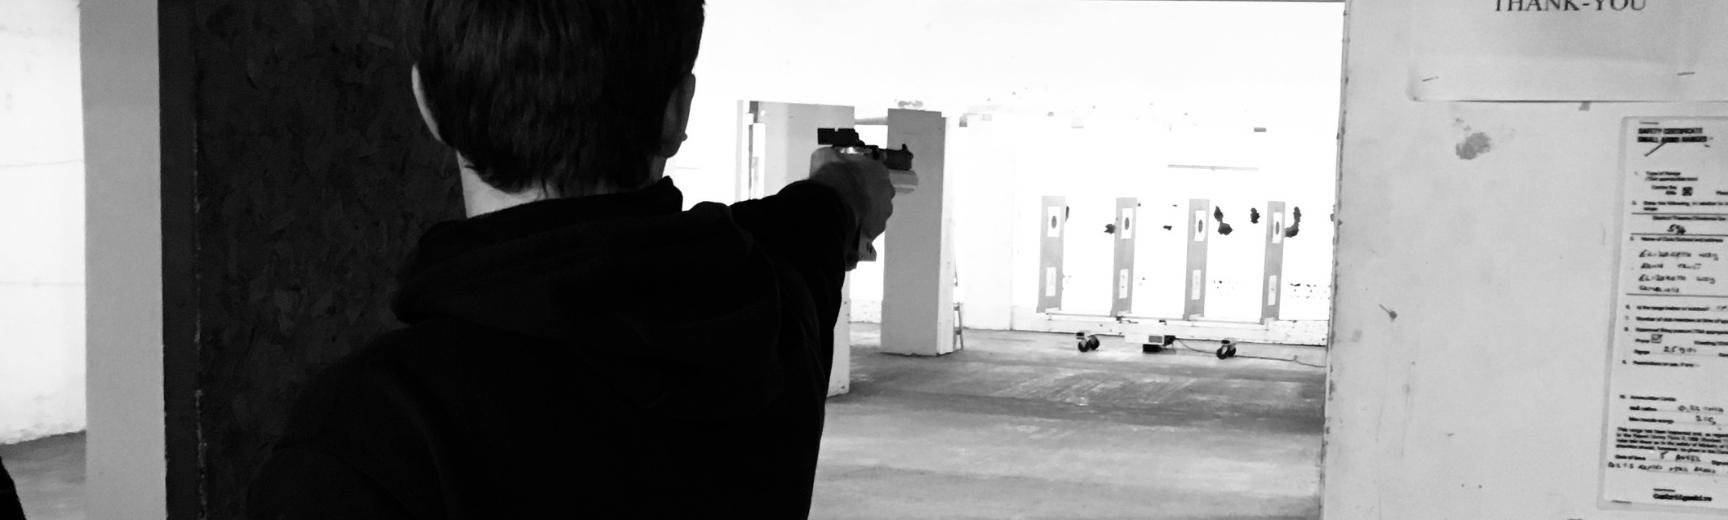 A person shooting towards a target with a pistol